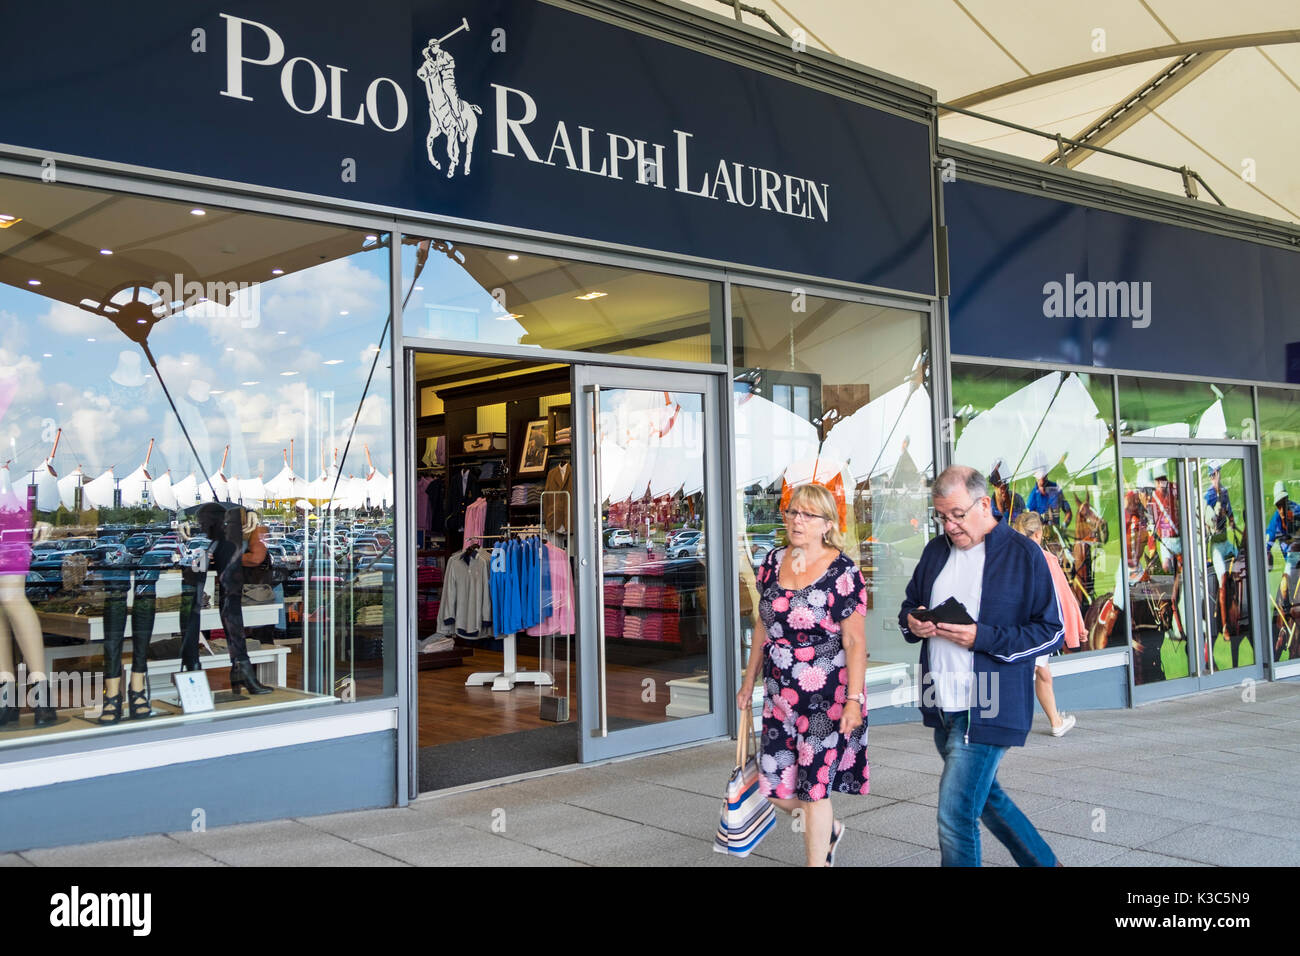 polo ralph lauren outlet hours